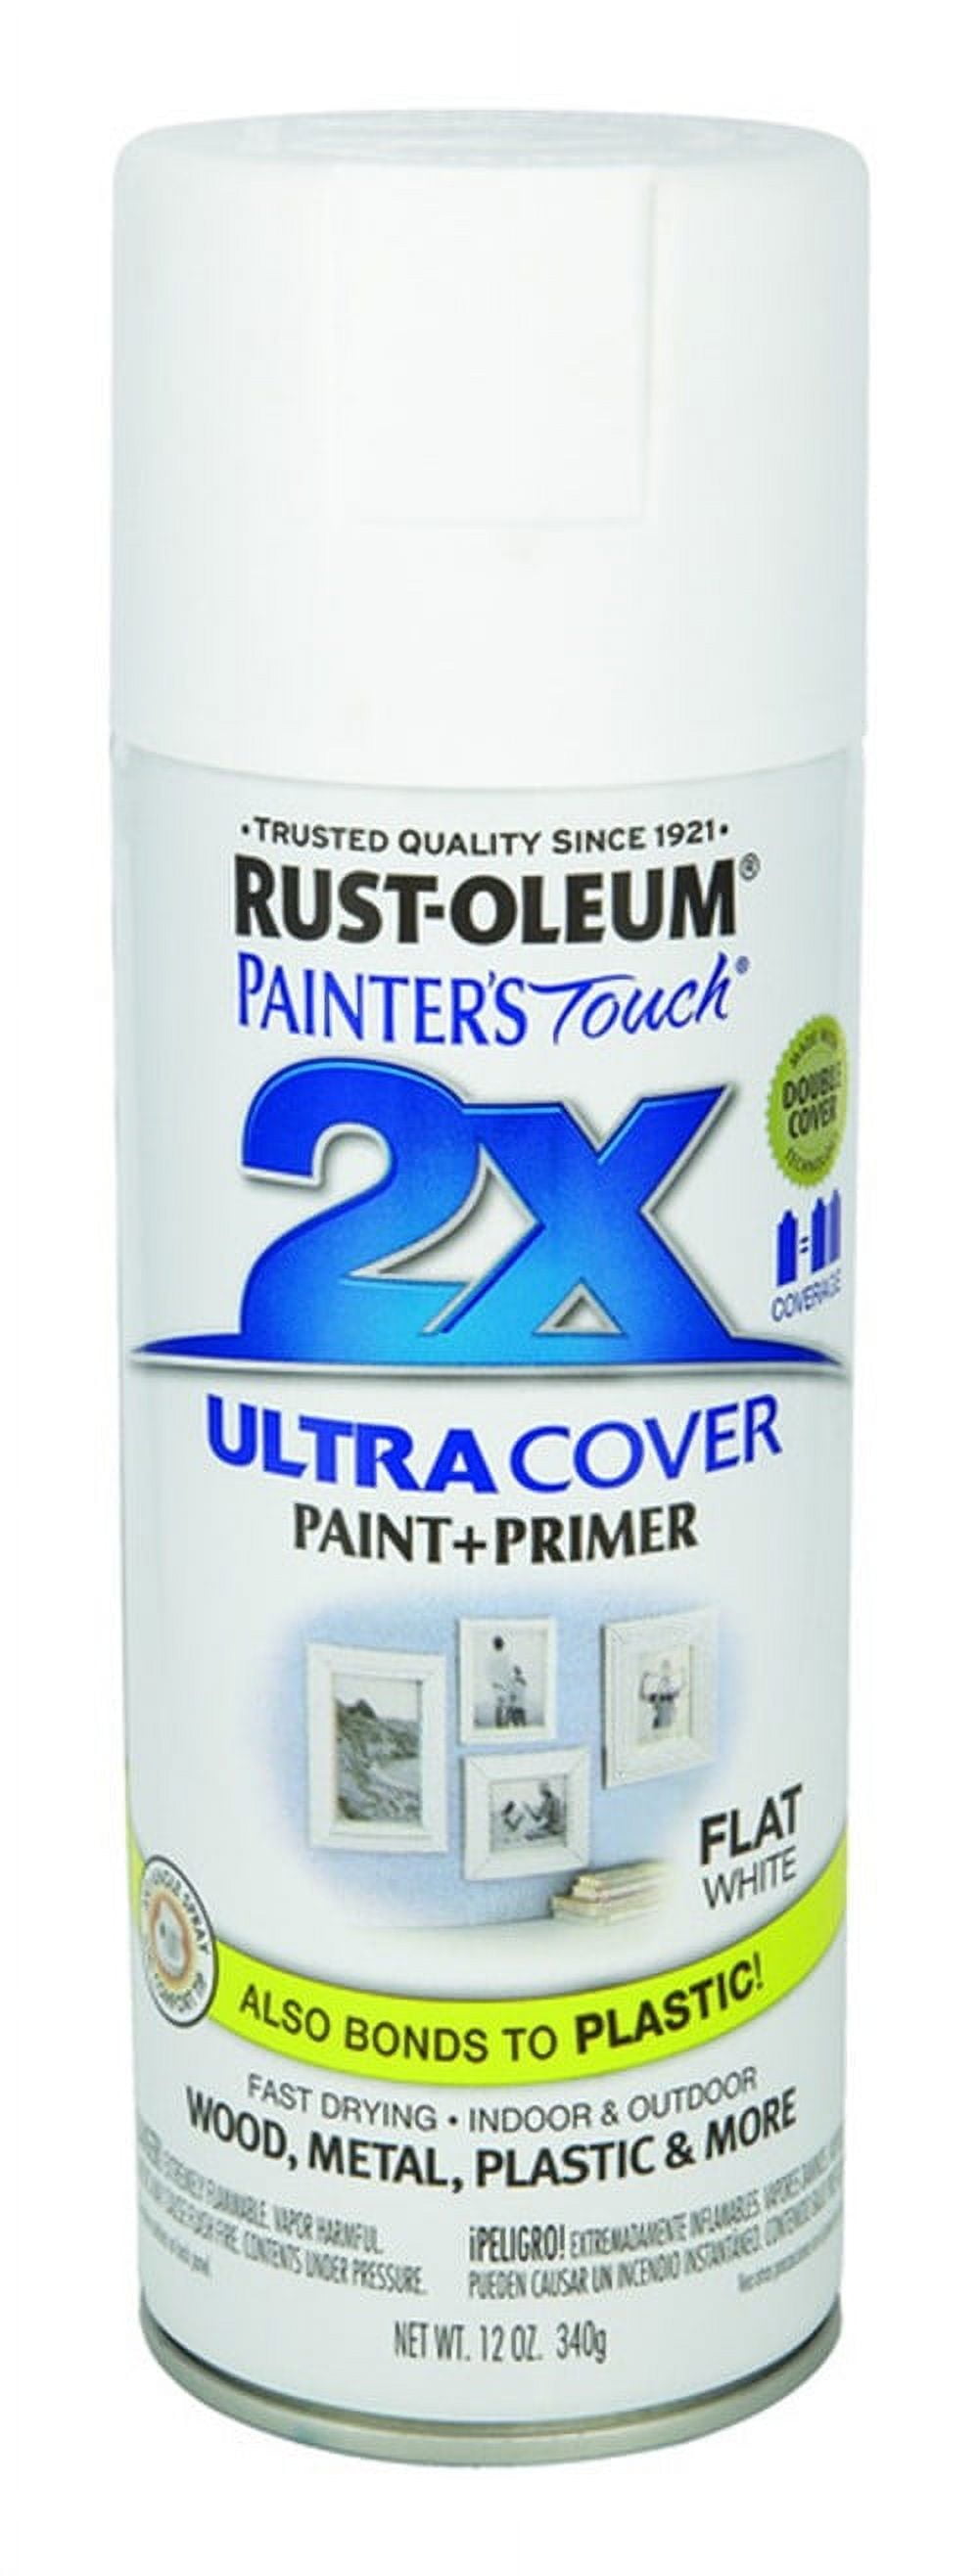 Rust-Oleum Painter's Touch 2X Ultra Cover Flat White Primer Spray